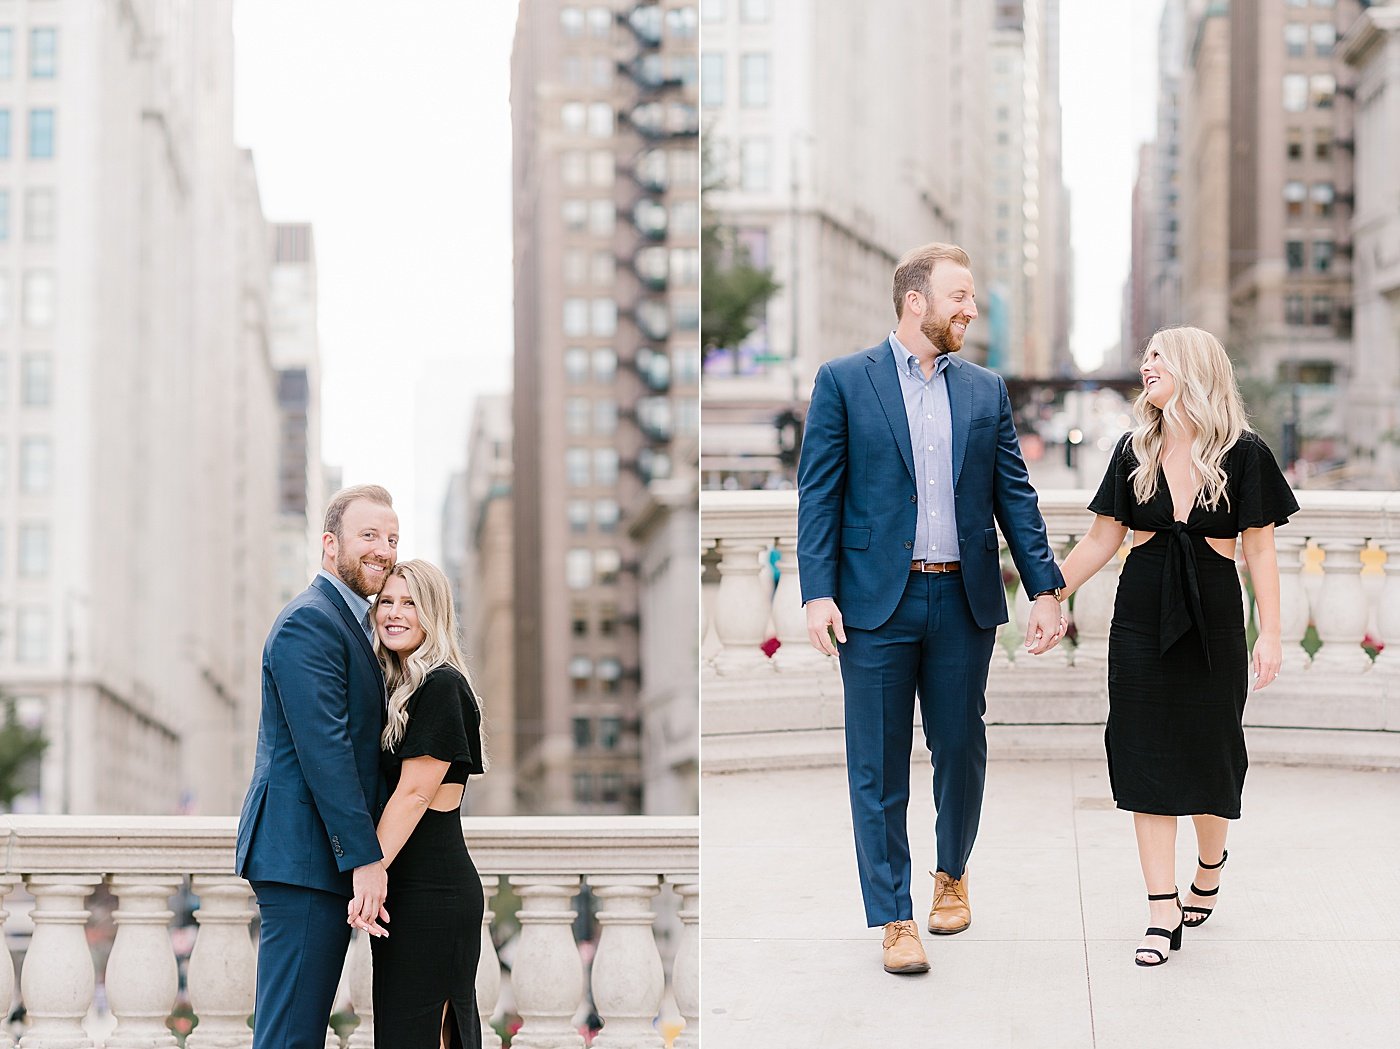 Keegan and Mark's Downtown Chicago Engagement Session Rebecca Shehorn Photography22.jpg